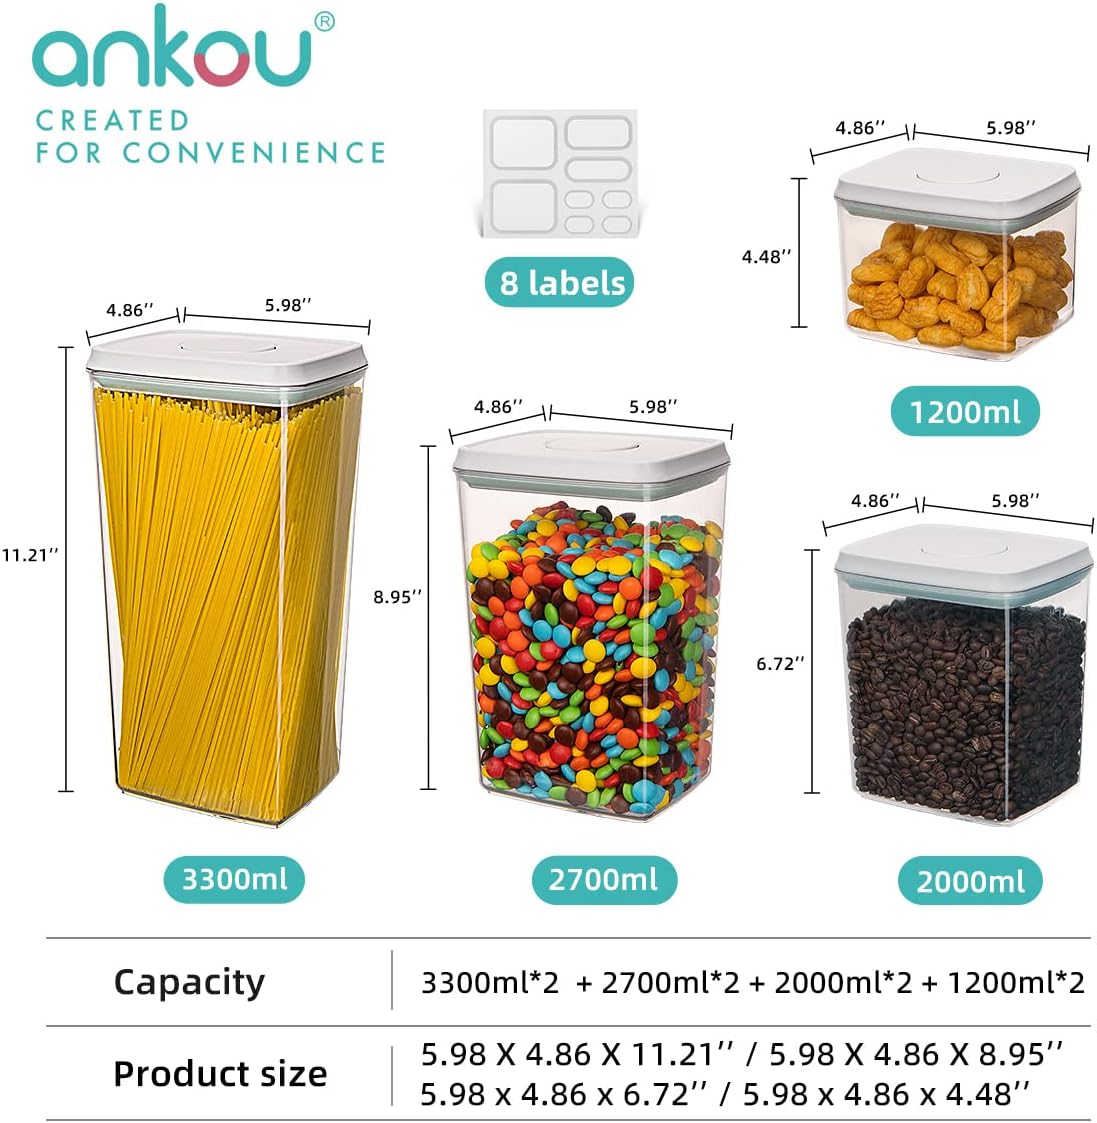 https://bigbigmart.com/wp-content/uploads/2023/09/Ankou-Food-Storage-Containers-Pop-Airtight-Food-Storage-Containers-with-Lids-for-Kitchen-Pantry-Organizing-Stackable-Container-For-Cereal-Snack-Flour-Sugar-Coffee-Spaghetti-8-Pcs-1.2-2.0-2.7-3.3qt2..jpg